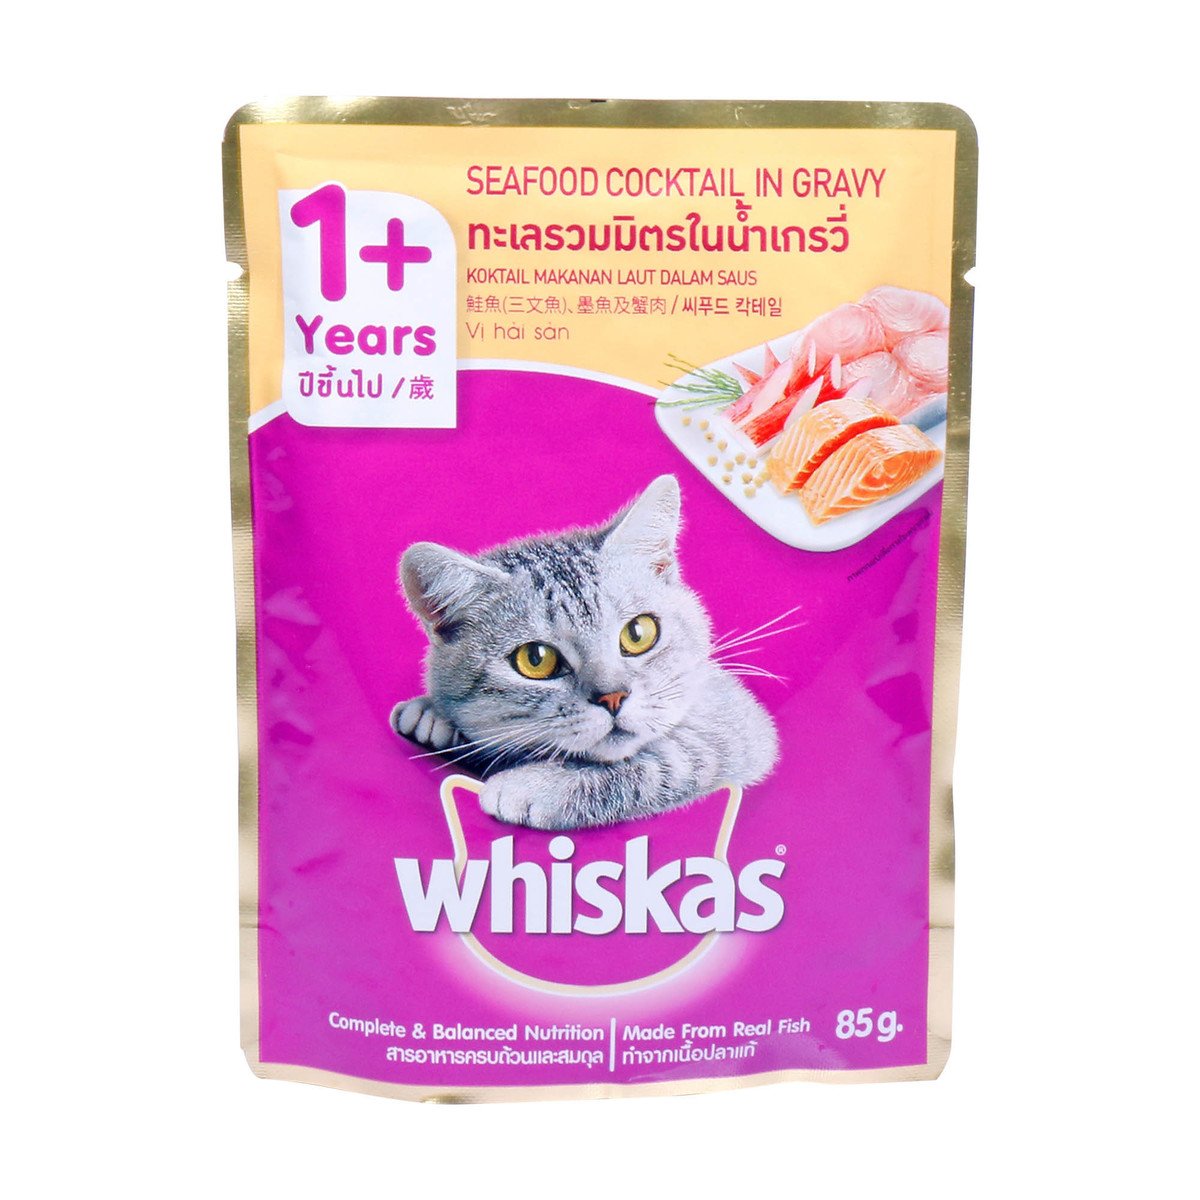 Whiskas Seafood Cocktail In Gravy 1+ Years 85g